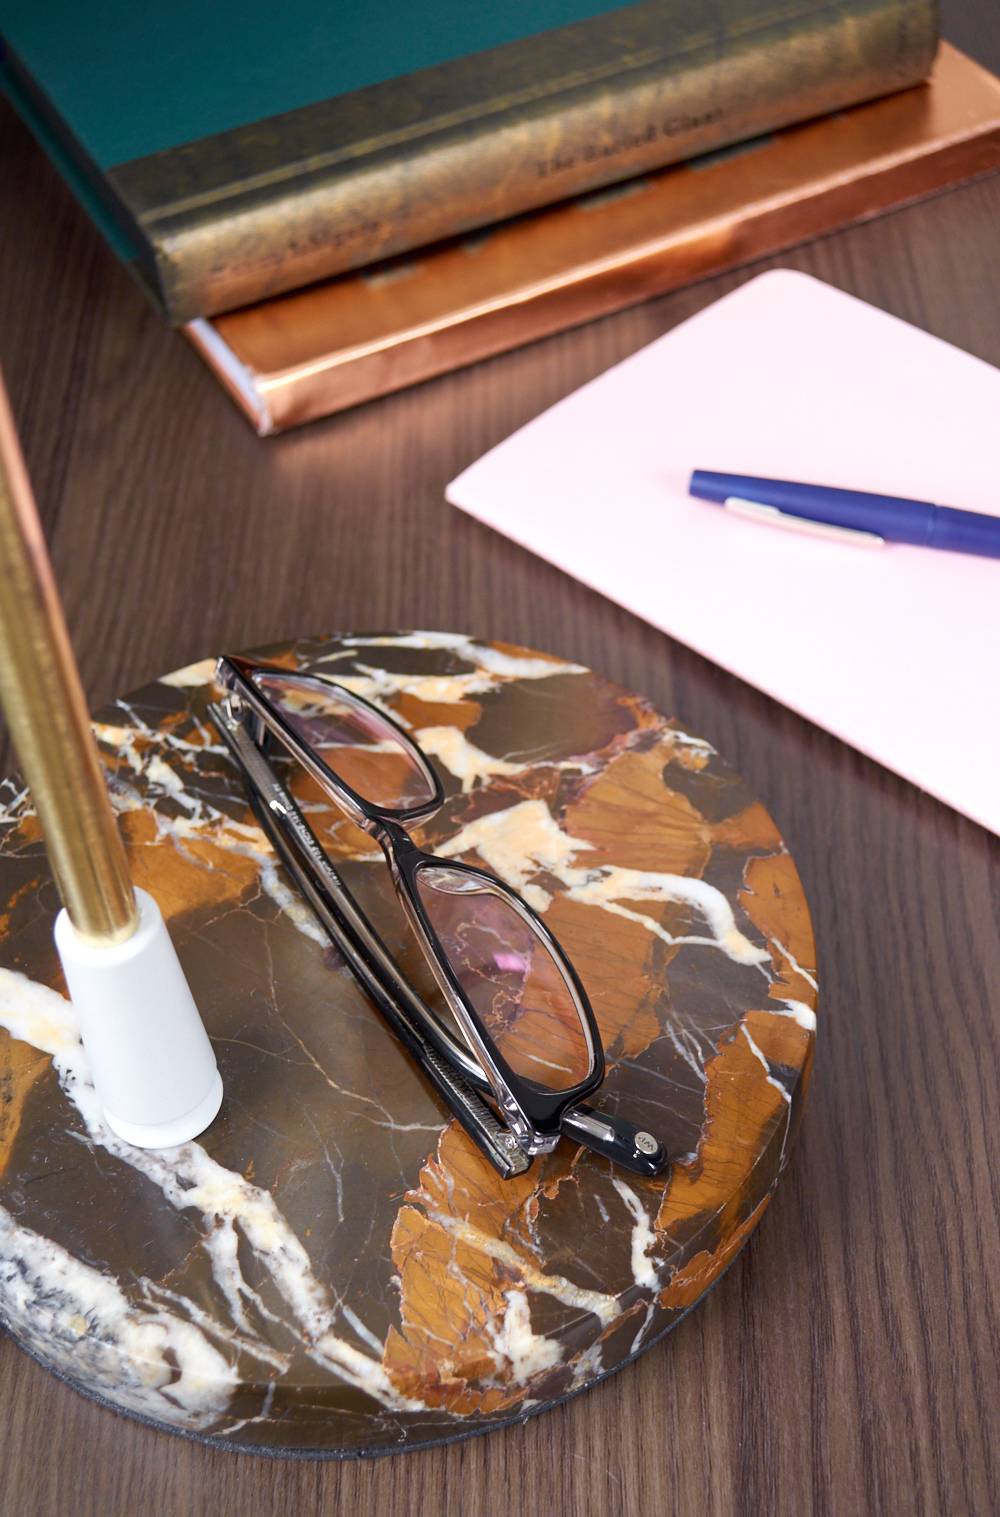 A pair of glasses sits on an object near a paper with a blue ink pen.